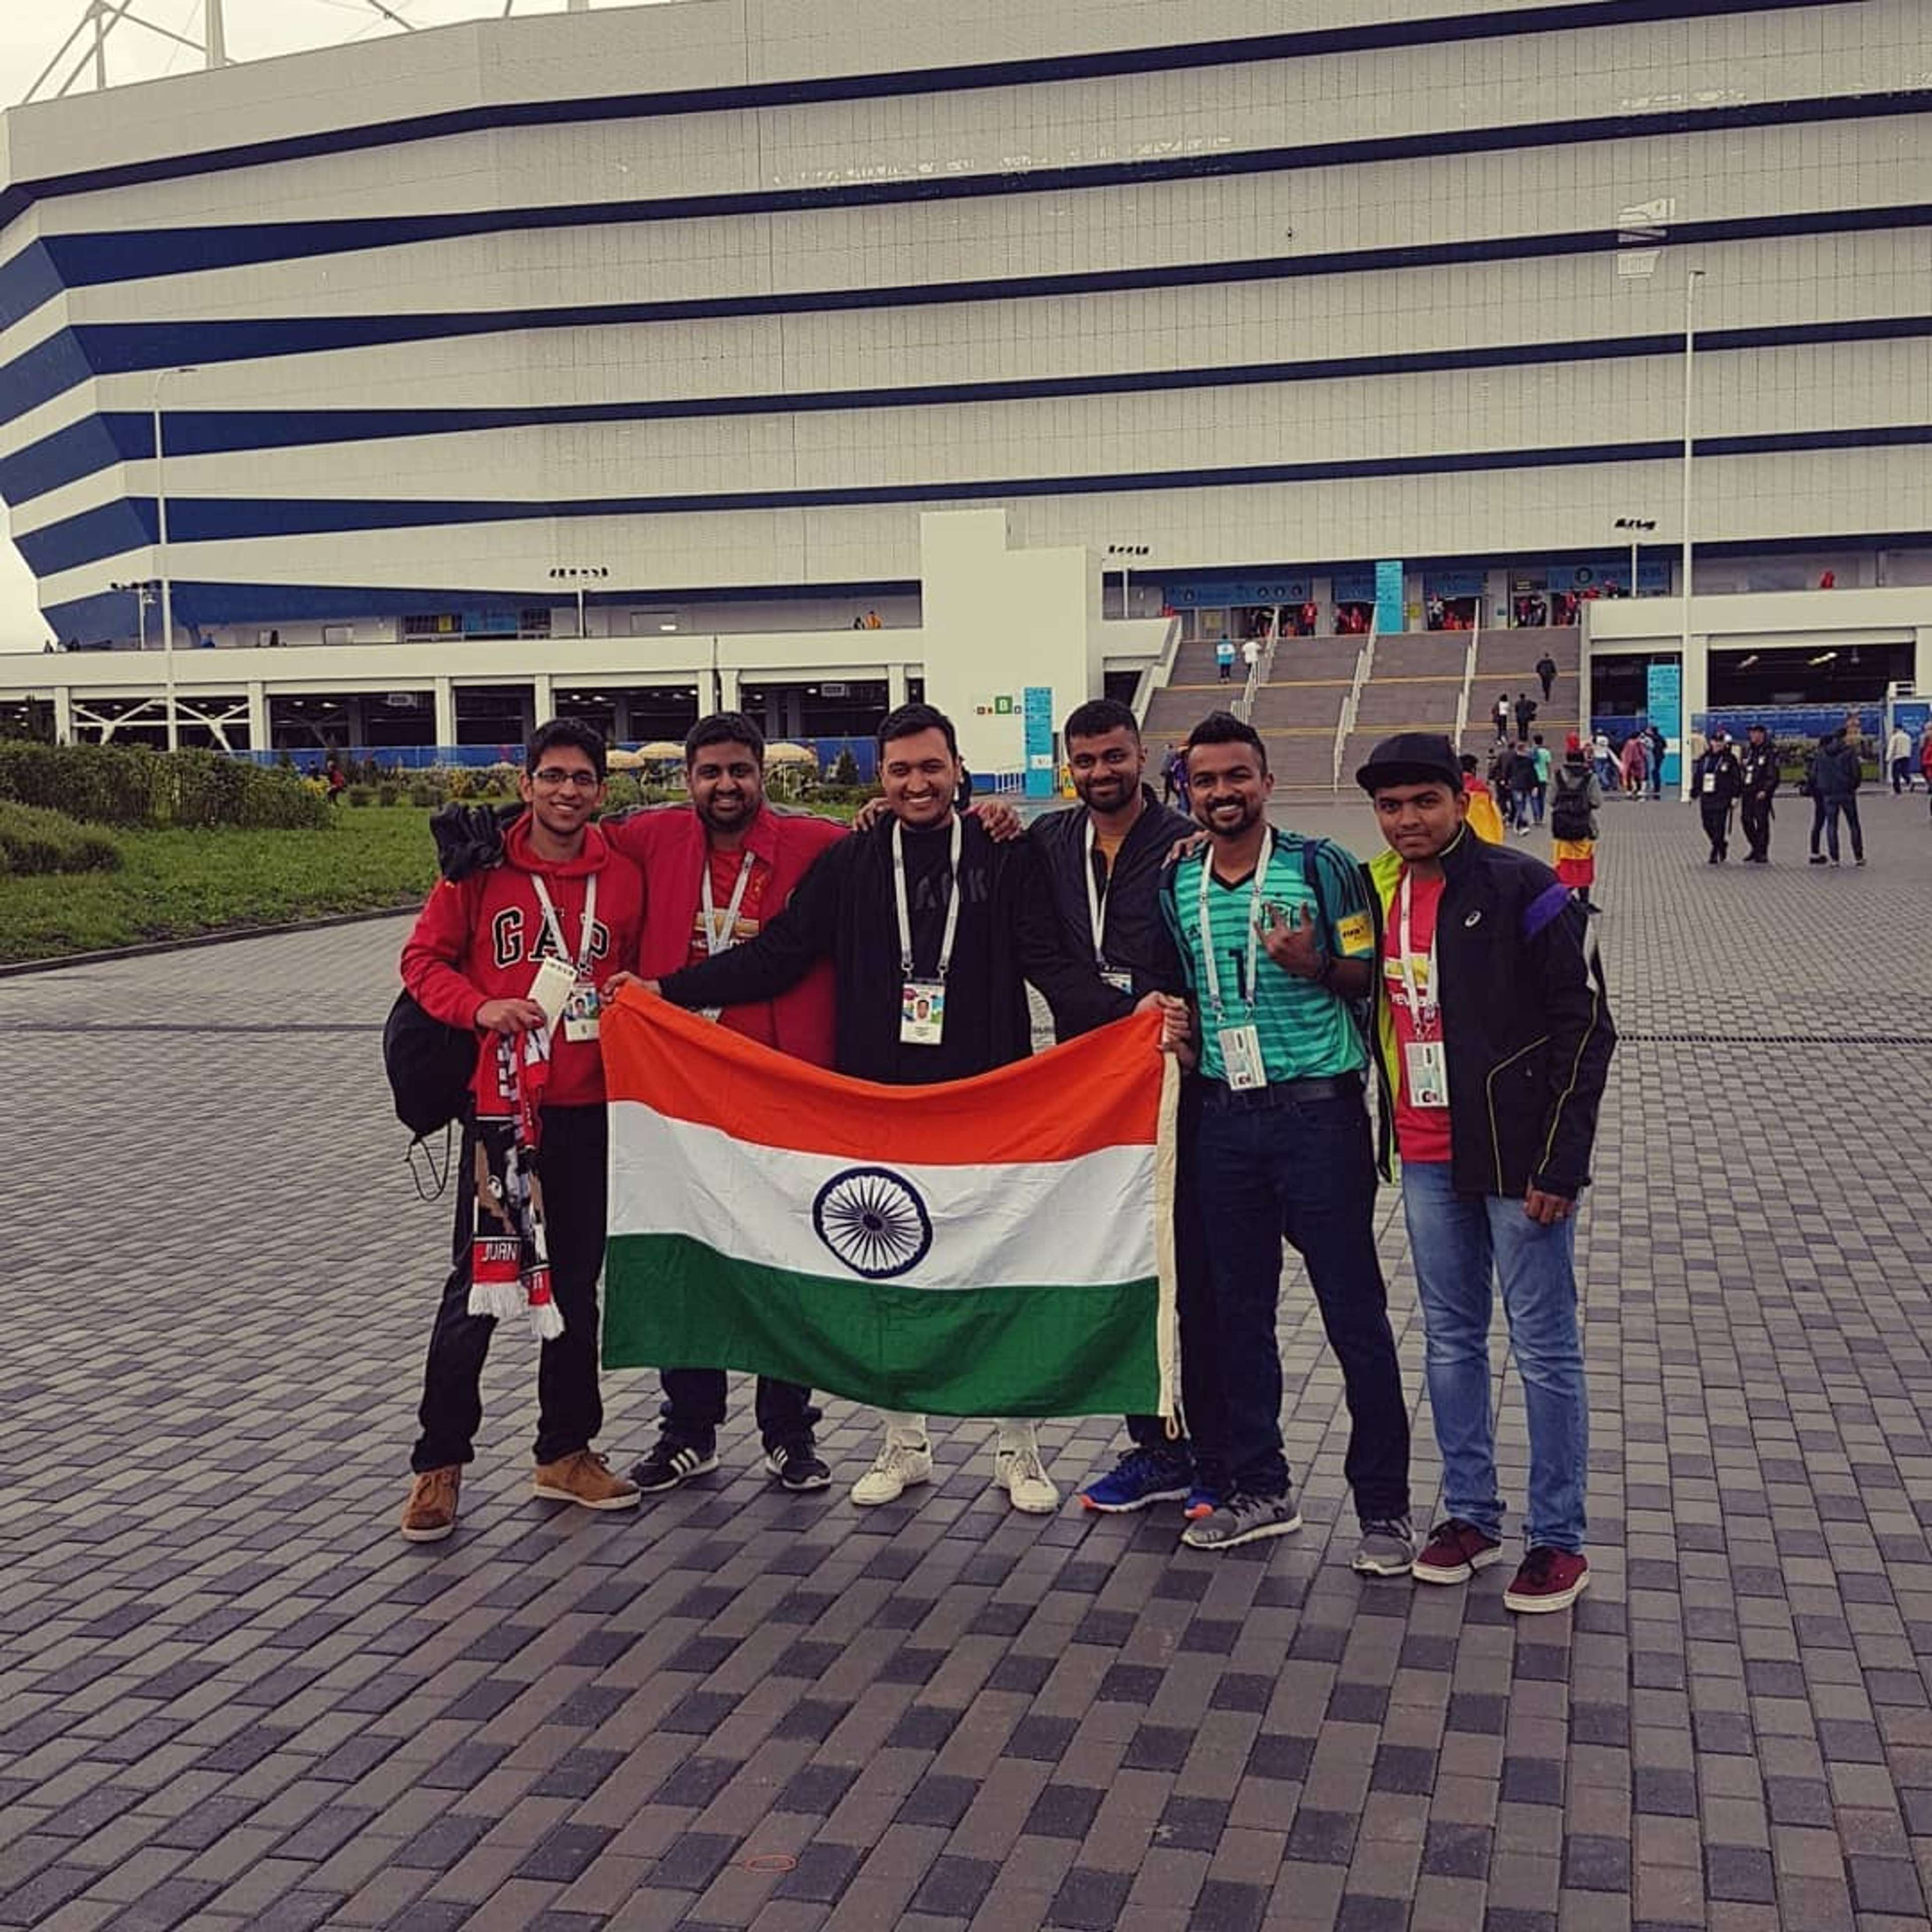 Indian fans at Russia 2018 World Cup